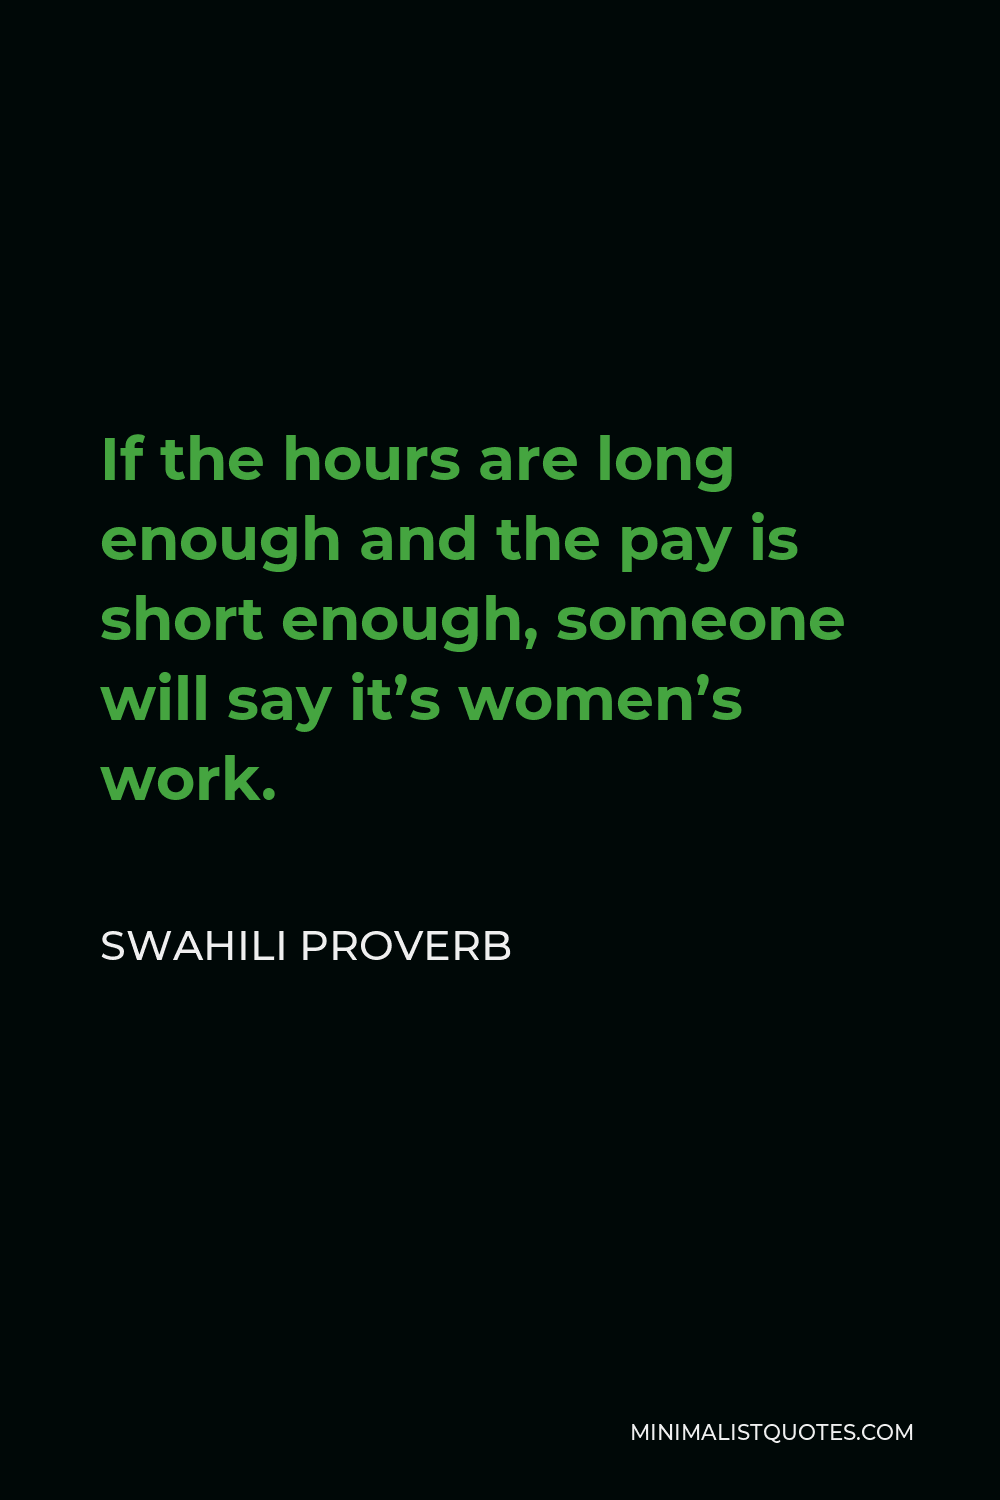 Swahili Proverb Quote - If the hours are long enough and the pay is short enough, someone will say it’s women’s work.